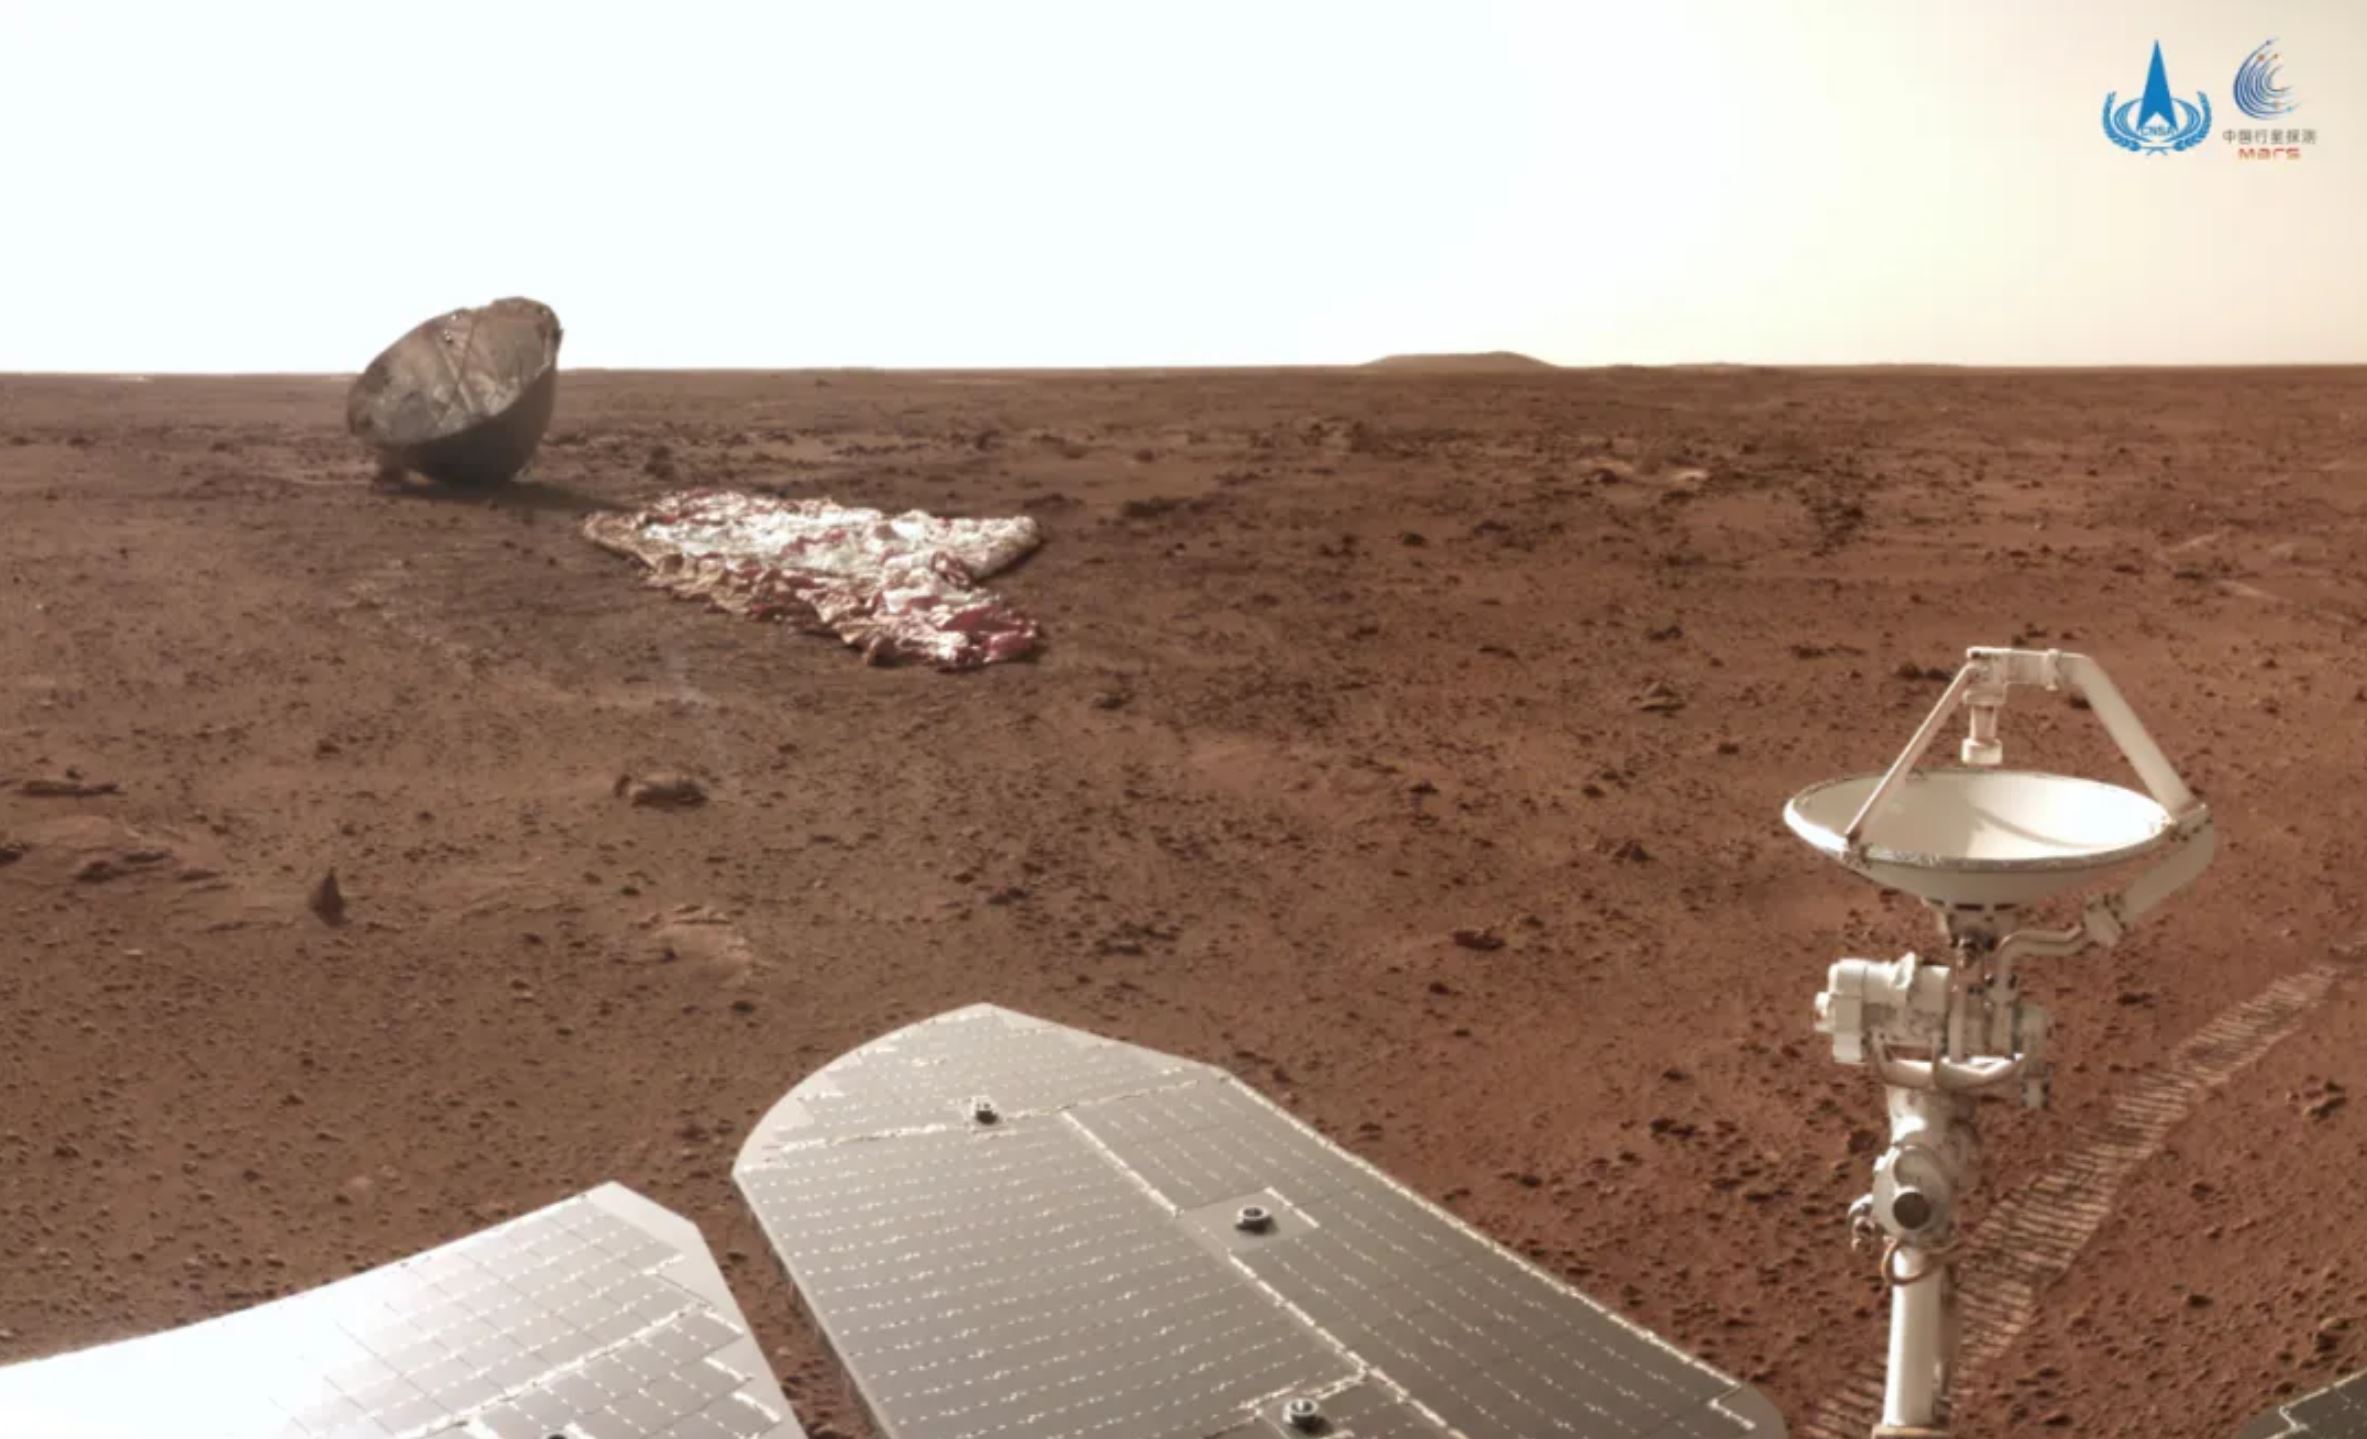 China may include a helicopter in the Mars sample return mission